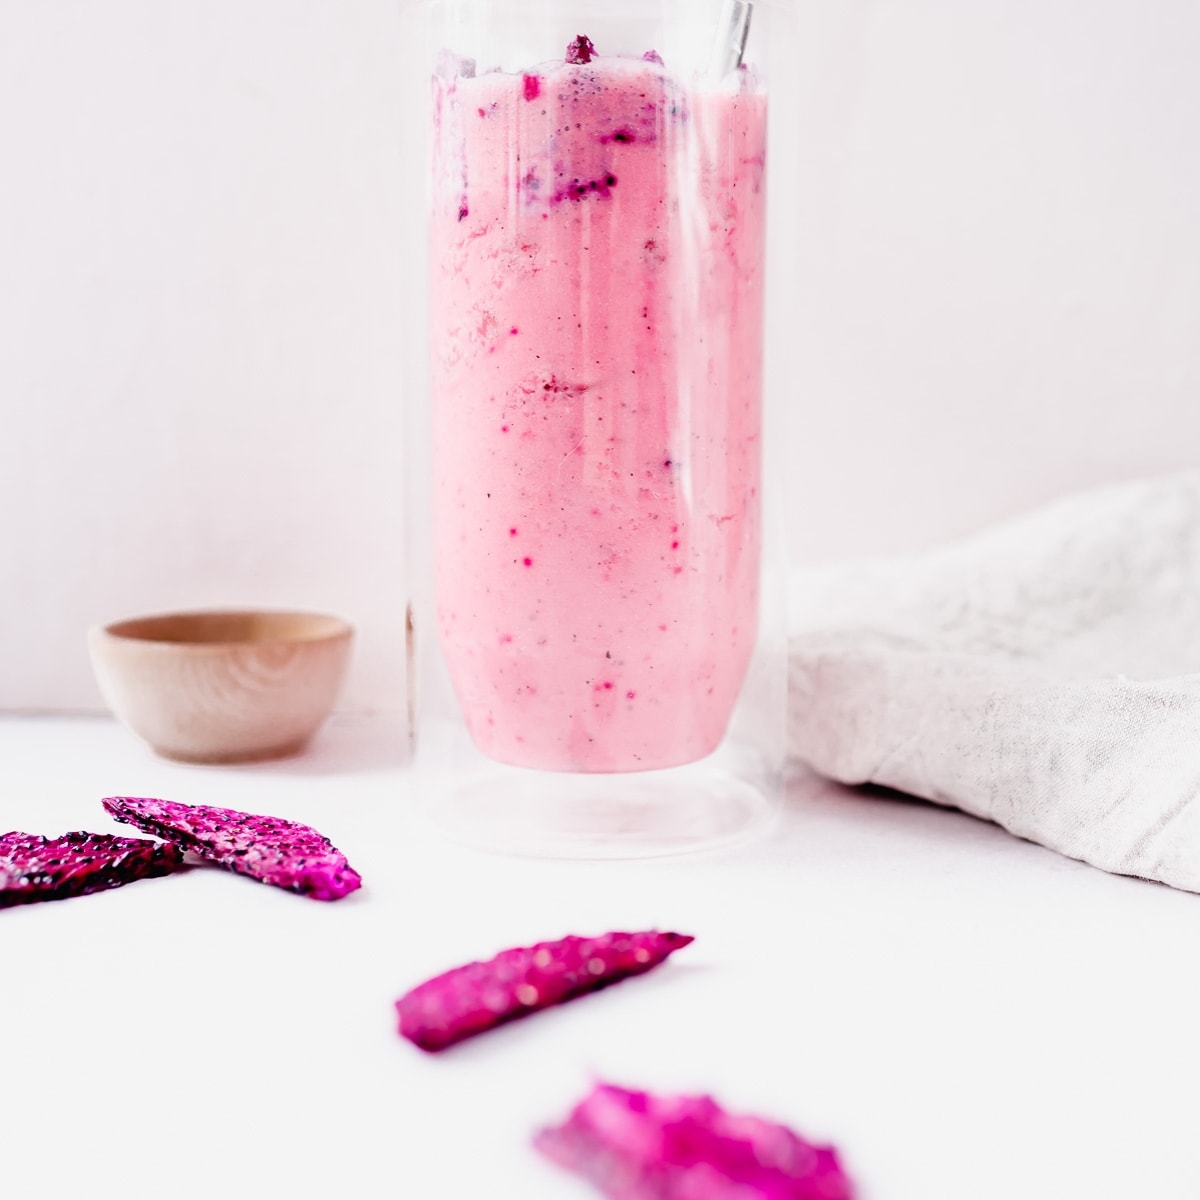 A pink smoothie in a glass with starbucks copycat drinks next to some pink chips.